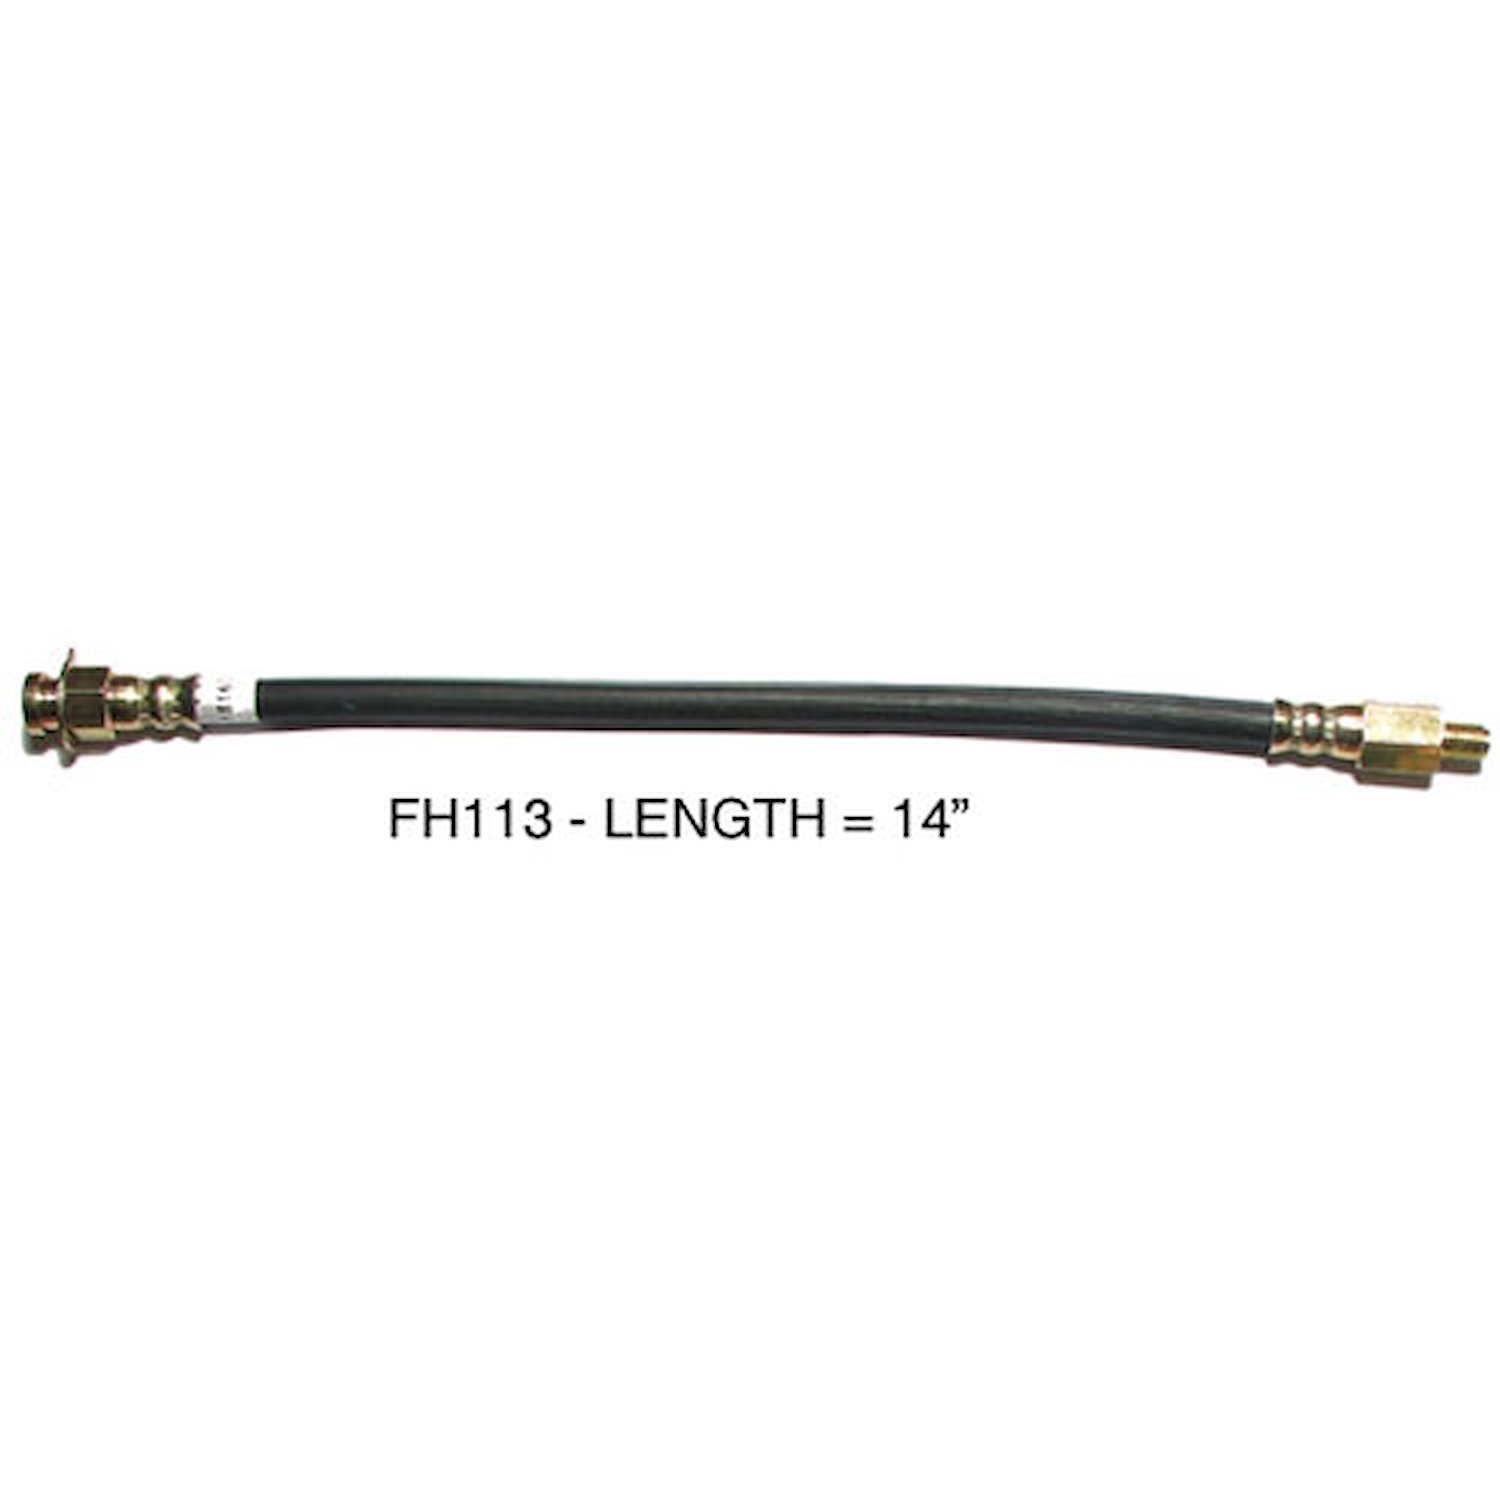 55-57 Front AND 76-77 Rear Flex Hose - All Cars